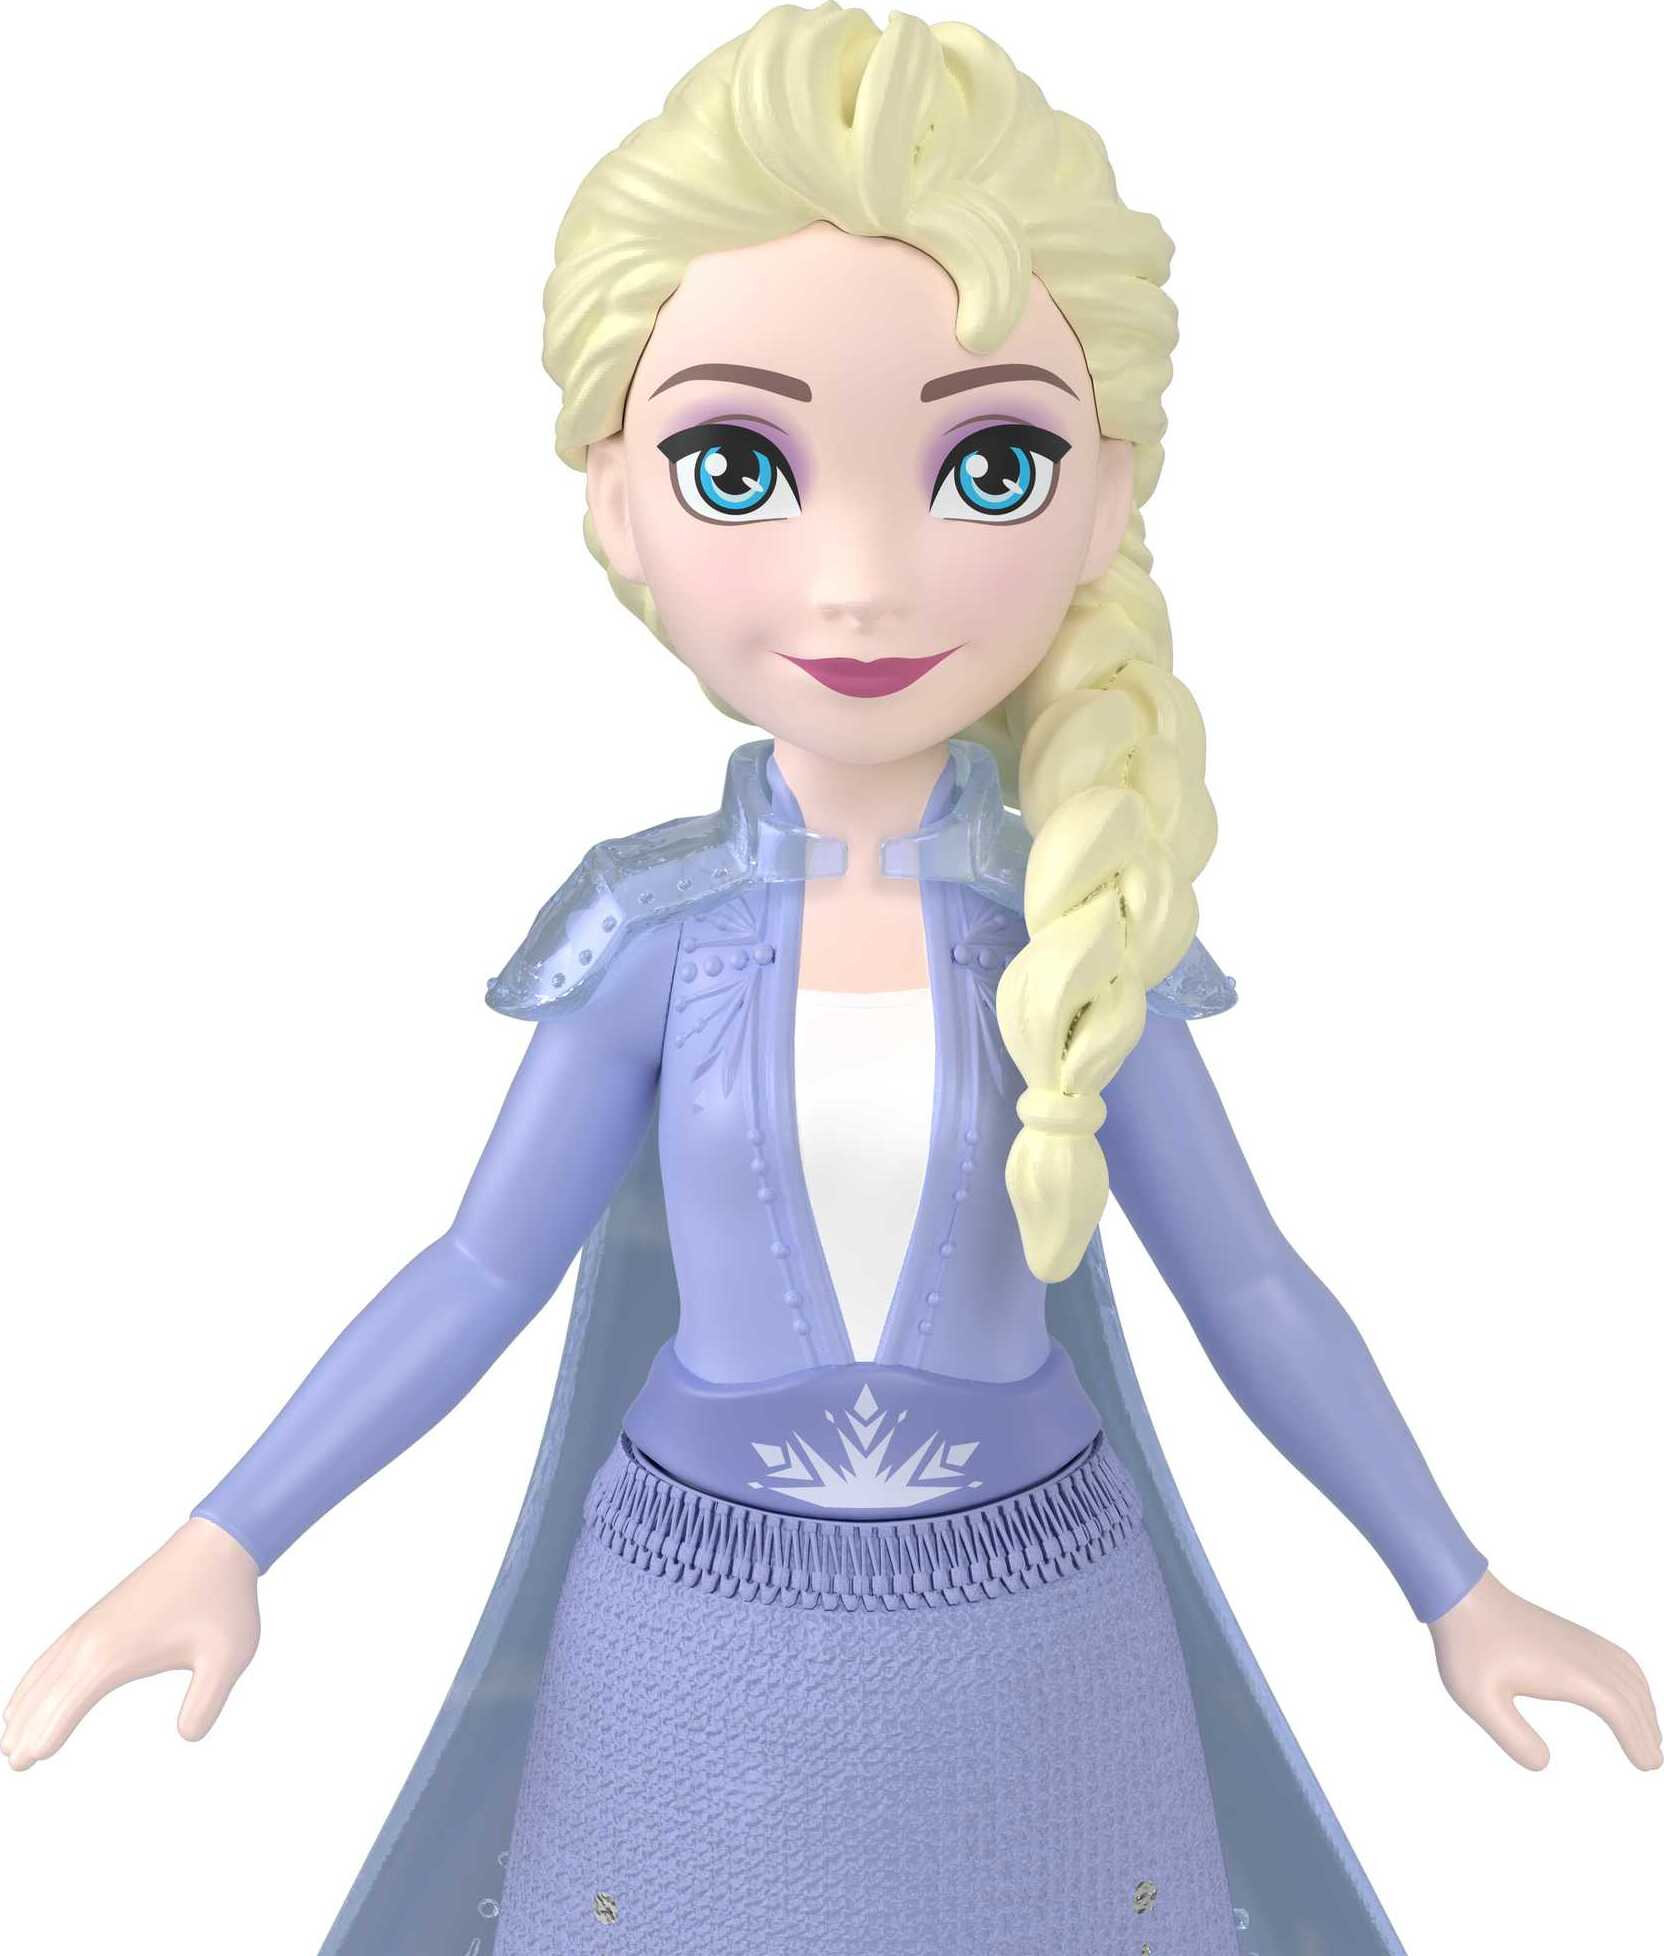 Disney Frozen Elsa Small Doll in Travel Look, Posable with Removable Cape & Skirt - image 5 of 6